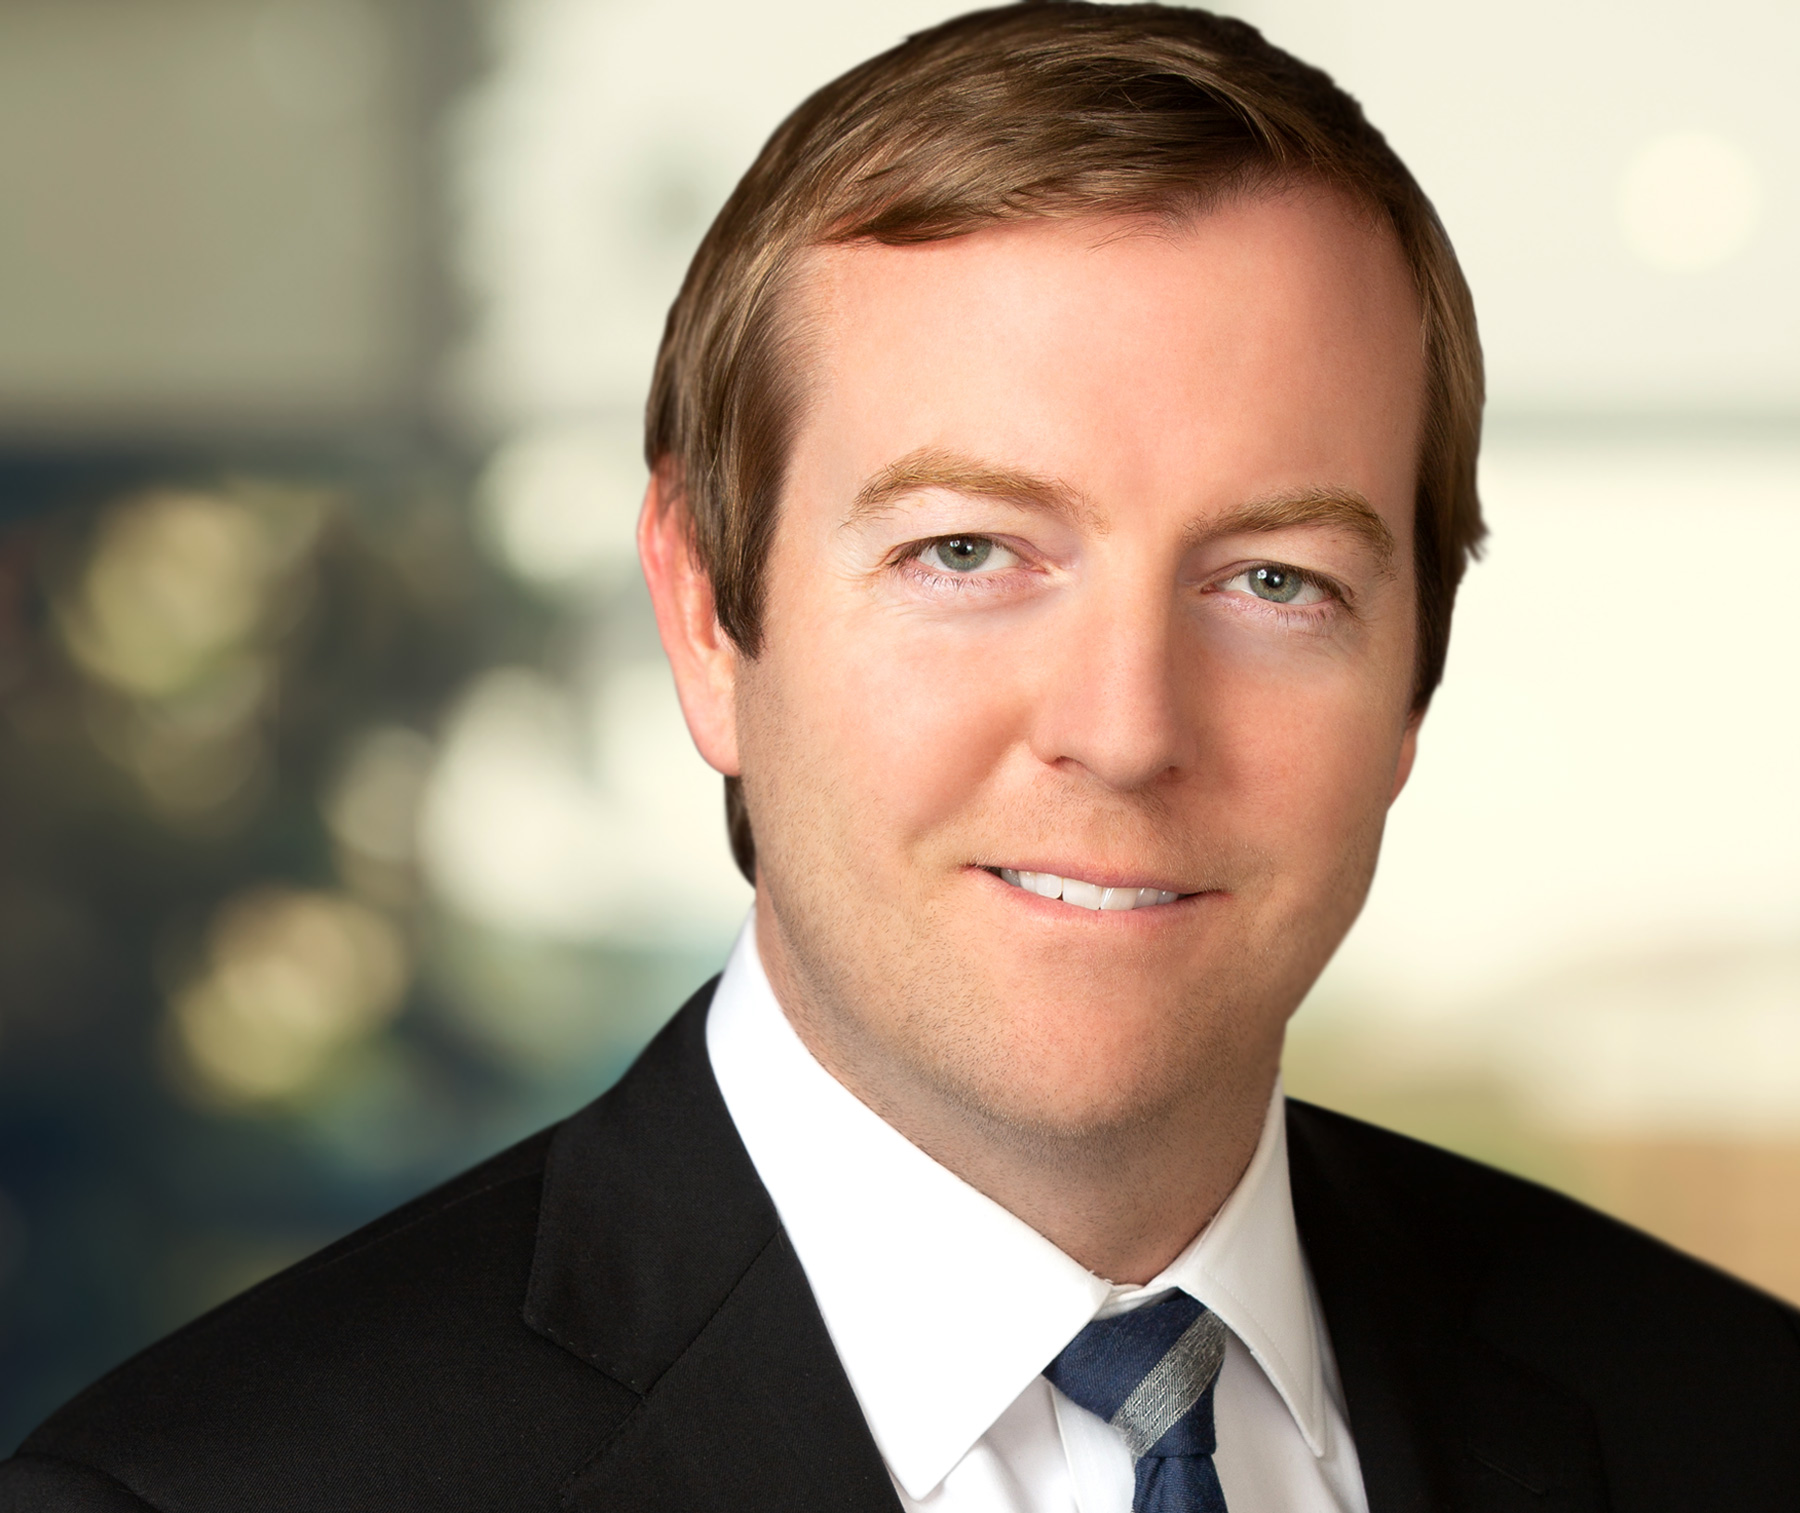 White & Case Litigator Kevin Menes Joins Intellectual Property firm Young Basile